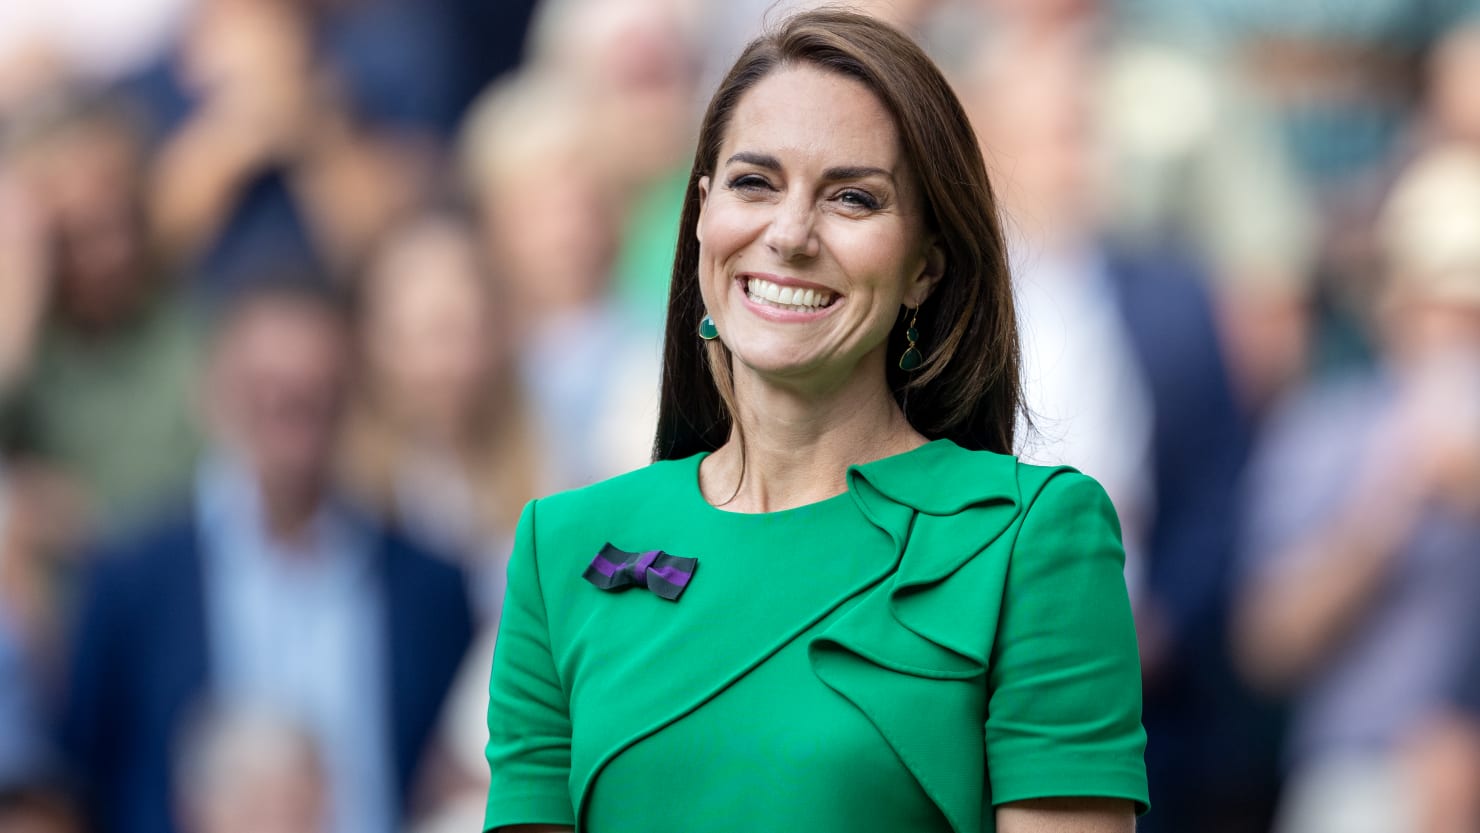 Kate Middleton would “love” to be at Wimbledon, says a friend